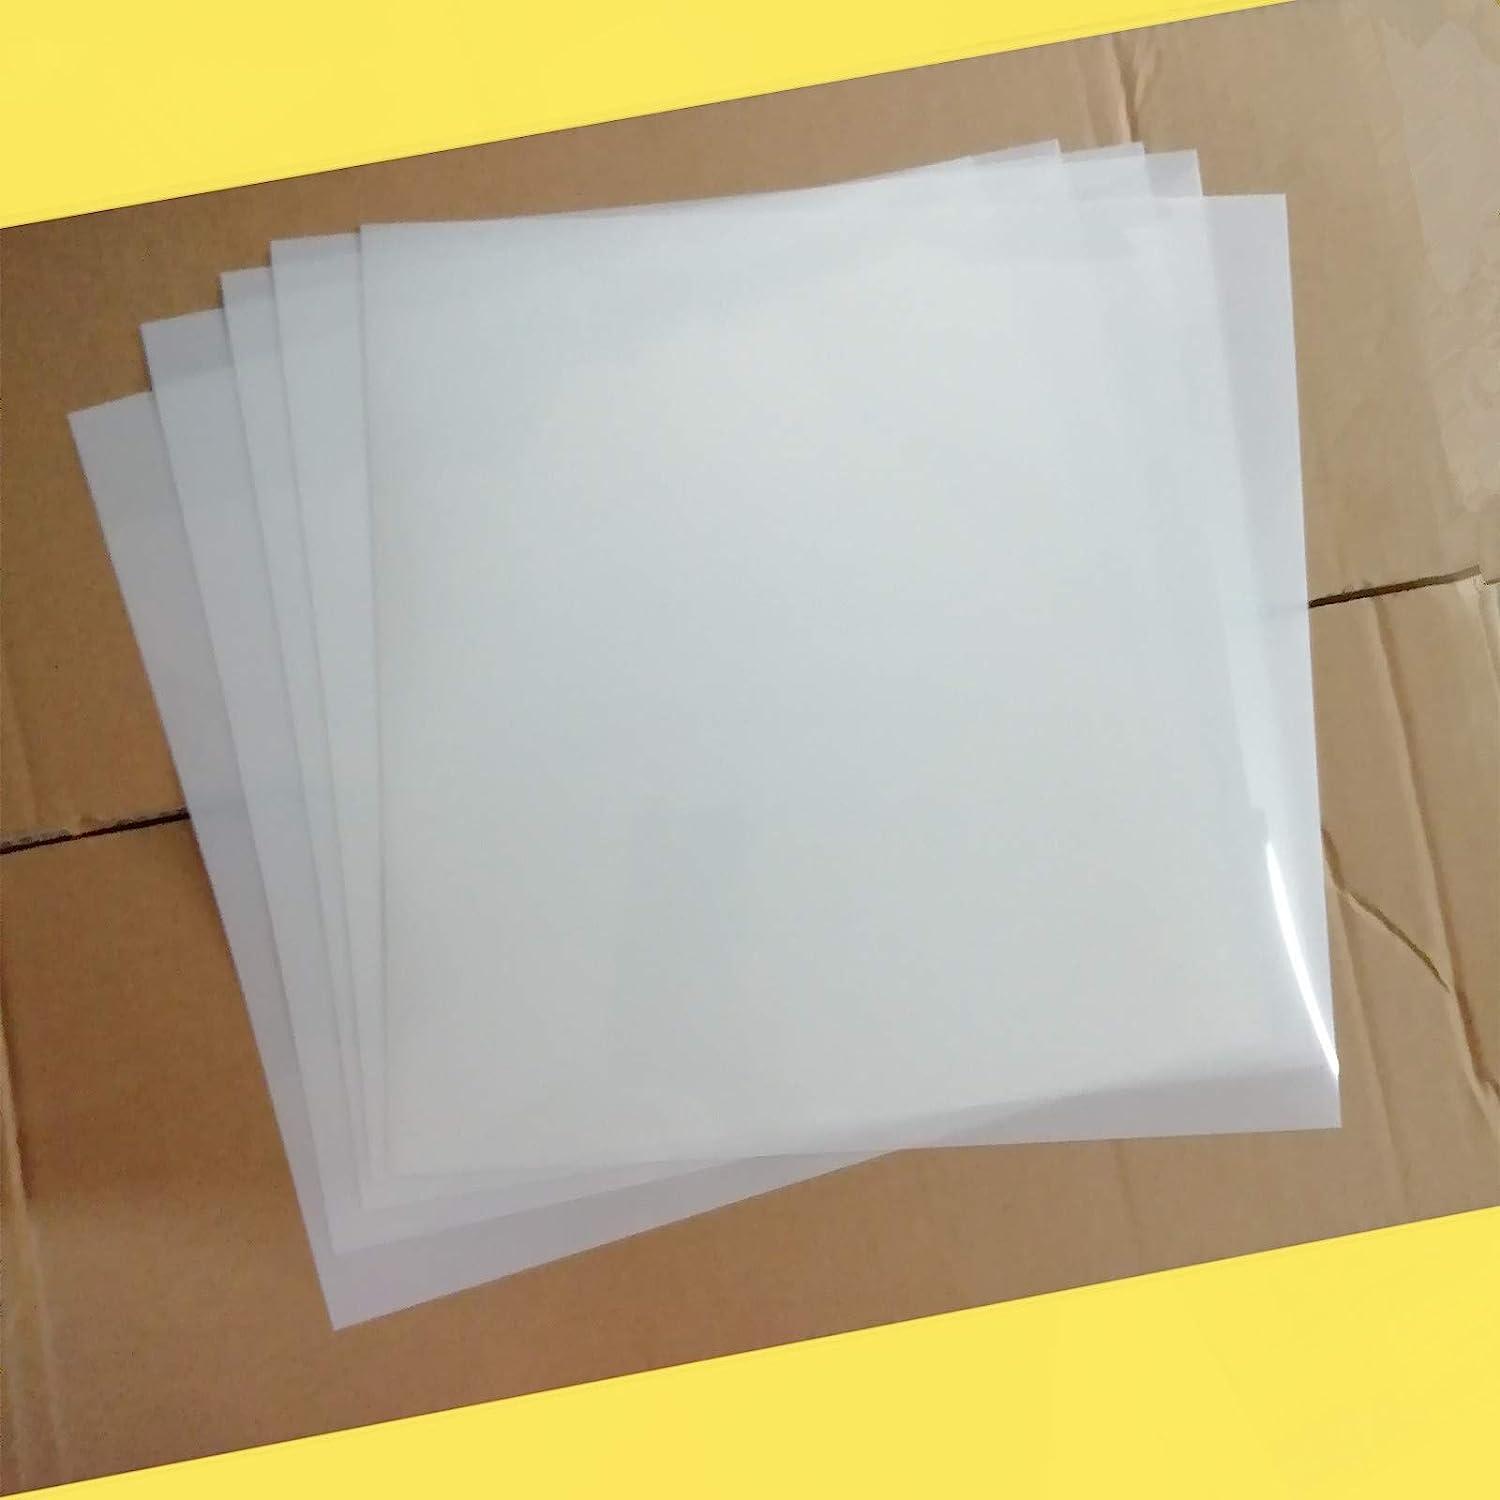 10PCS 10mil Blank Mylar Stencil Sheets,12X24 inch Milky Translucent PET  Blank Stencils Sheets,Template Material for Cutting Machines, Laser  Cutting